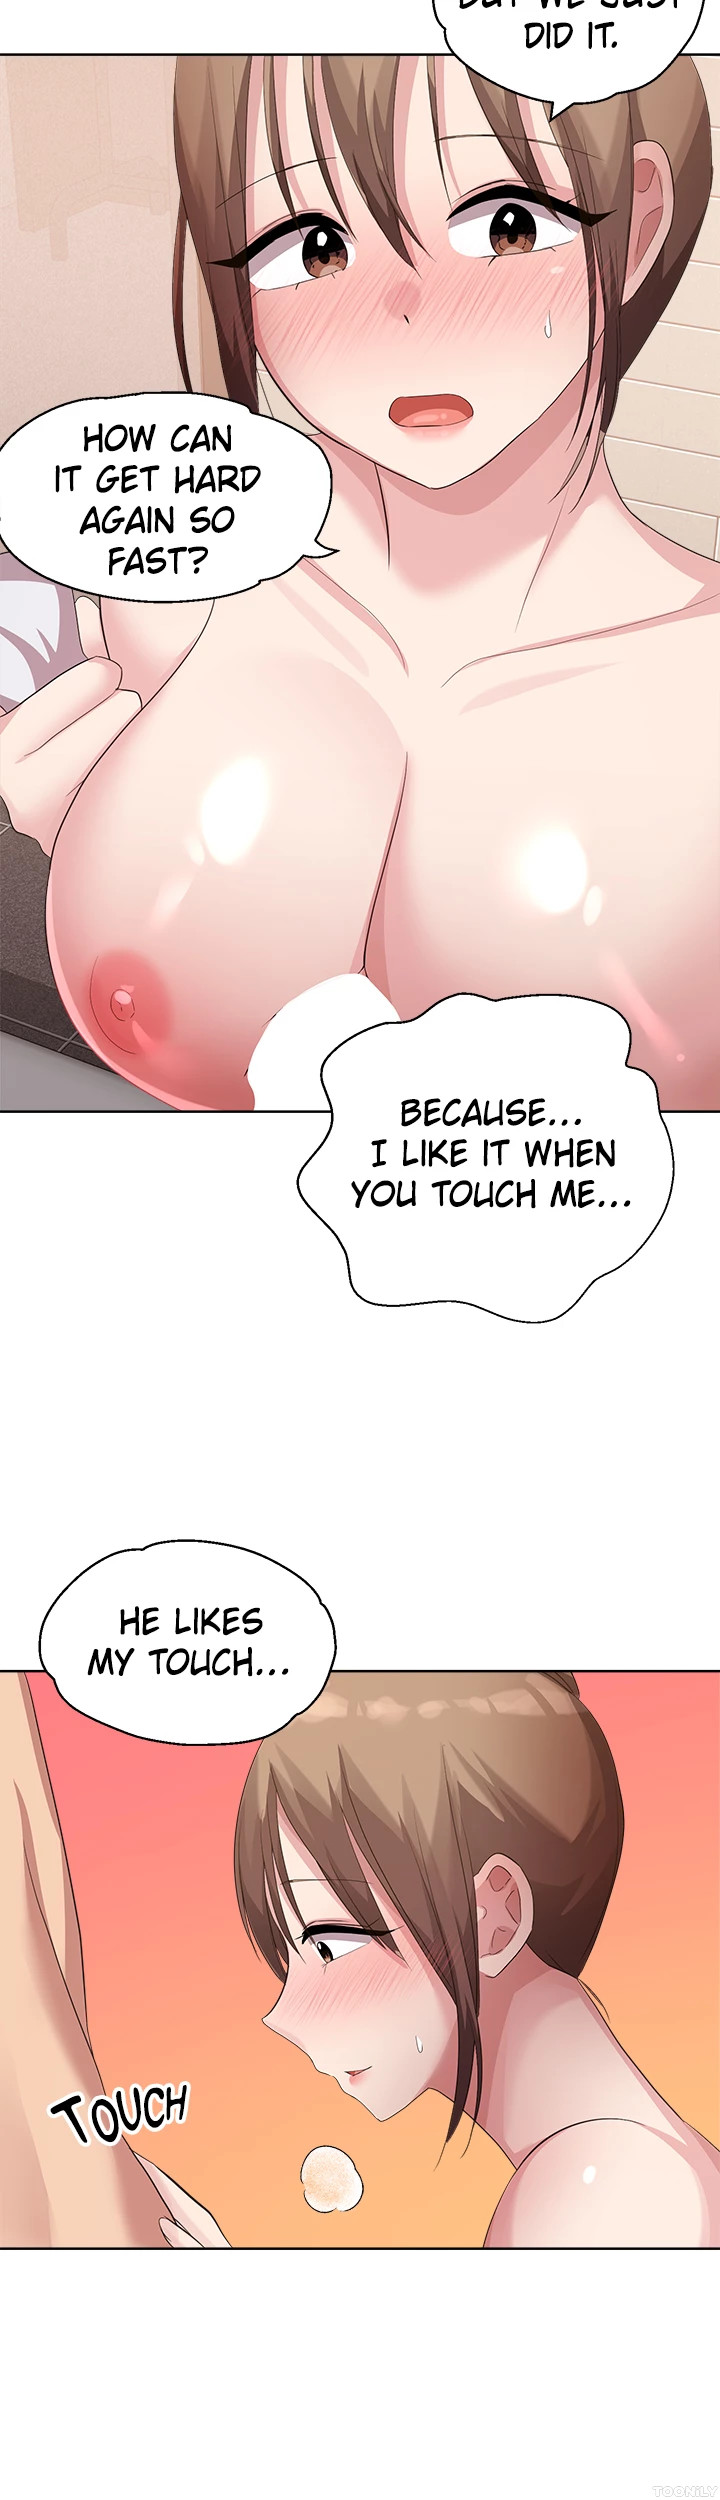 Girls I Used to Teach - Chapter 14 Page 26